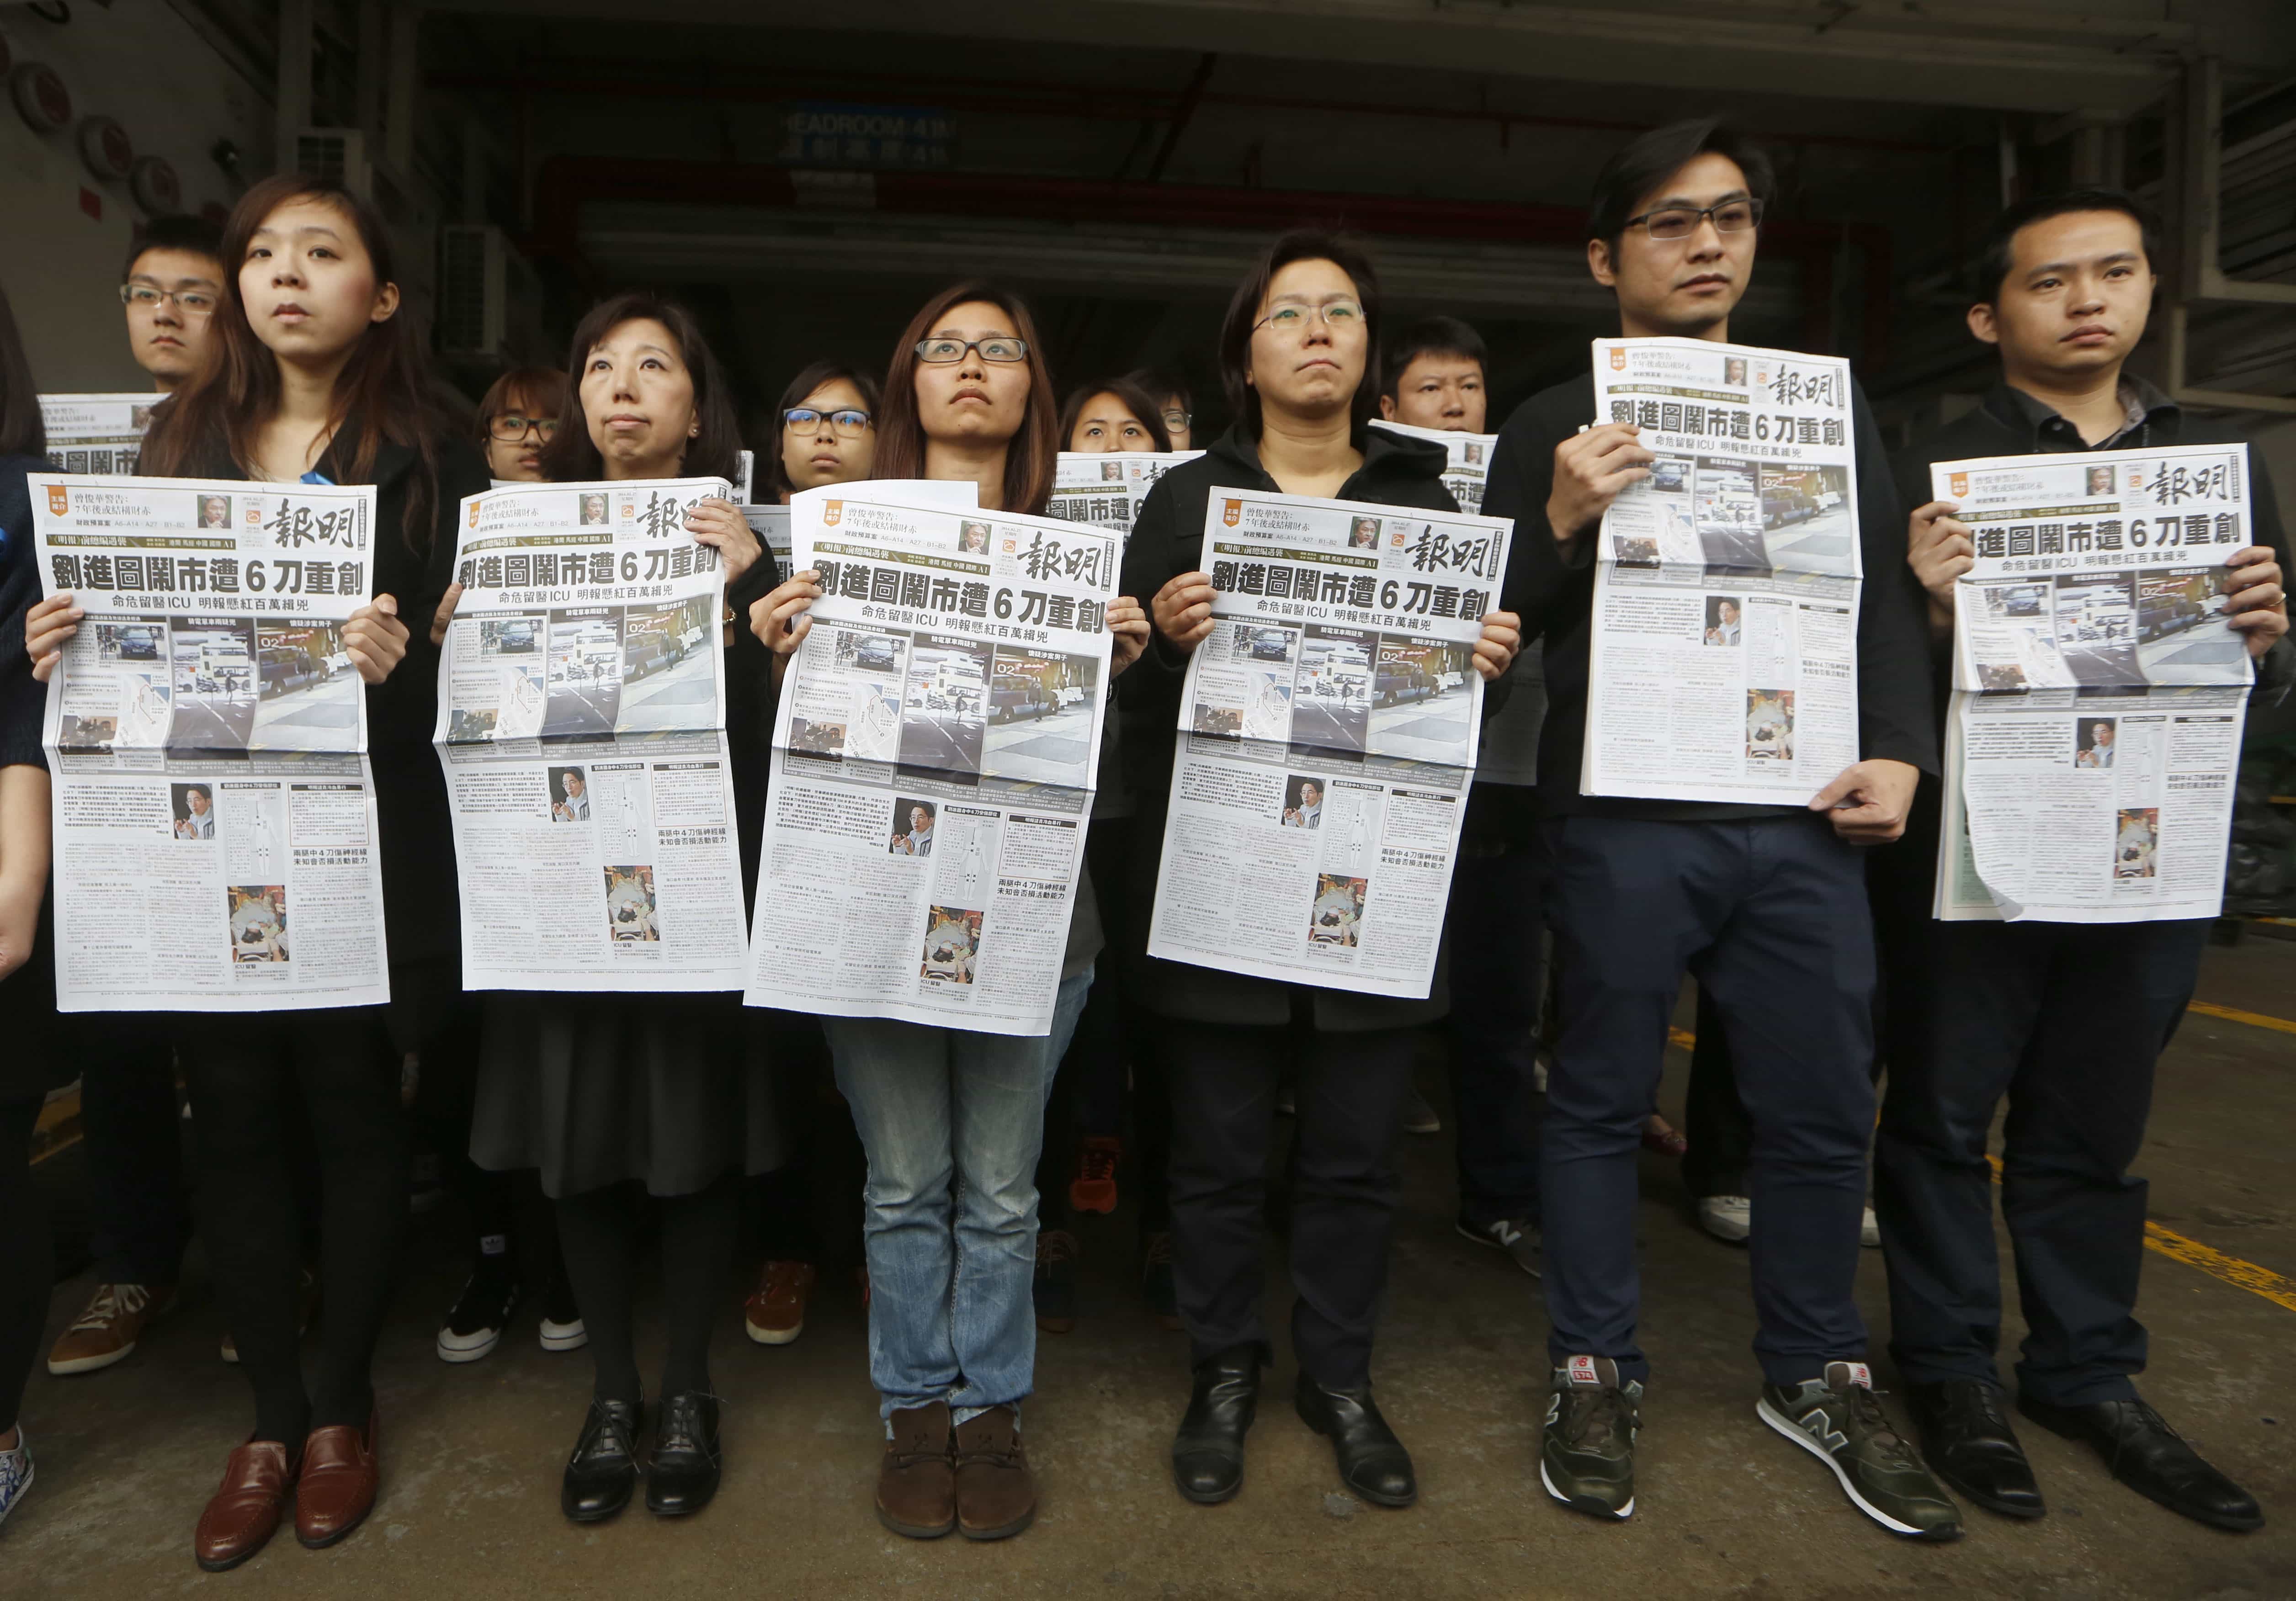 Editorial staff members of "Ming Pao" newspaper hold the front page of their newspaper with the headline on attack on former editor Kevin Lau during a protest outside the paper's office in Hong Kong, 27 February 2014, AP Photo/Kin Cheung